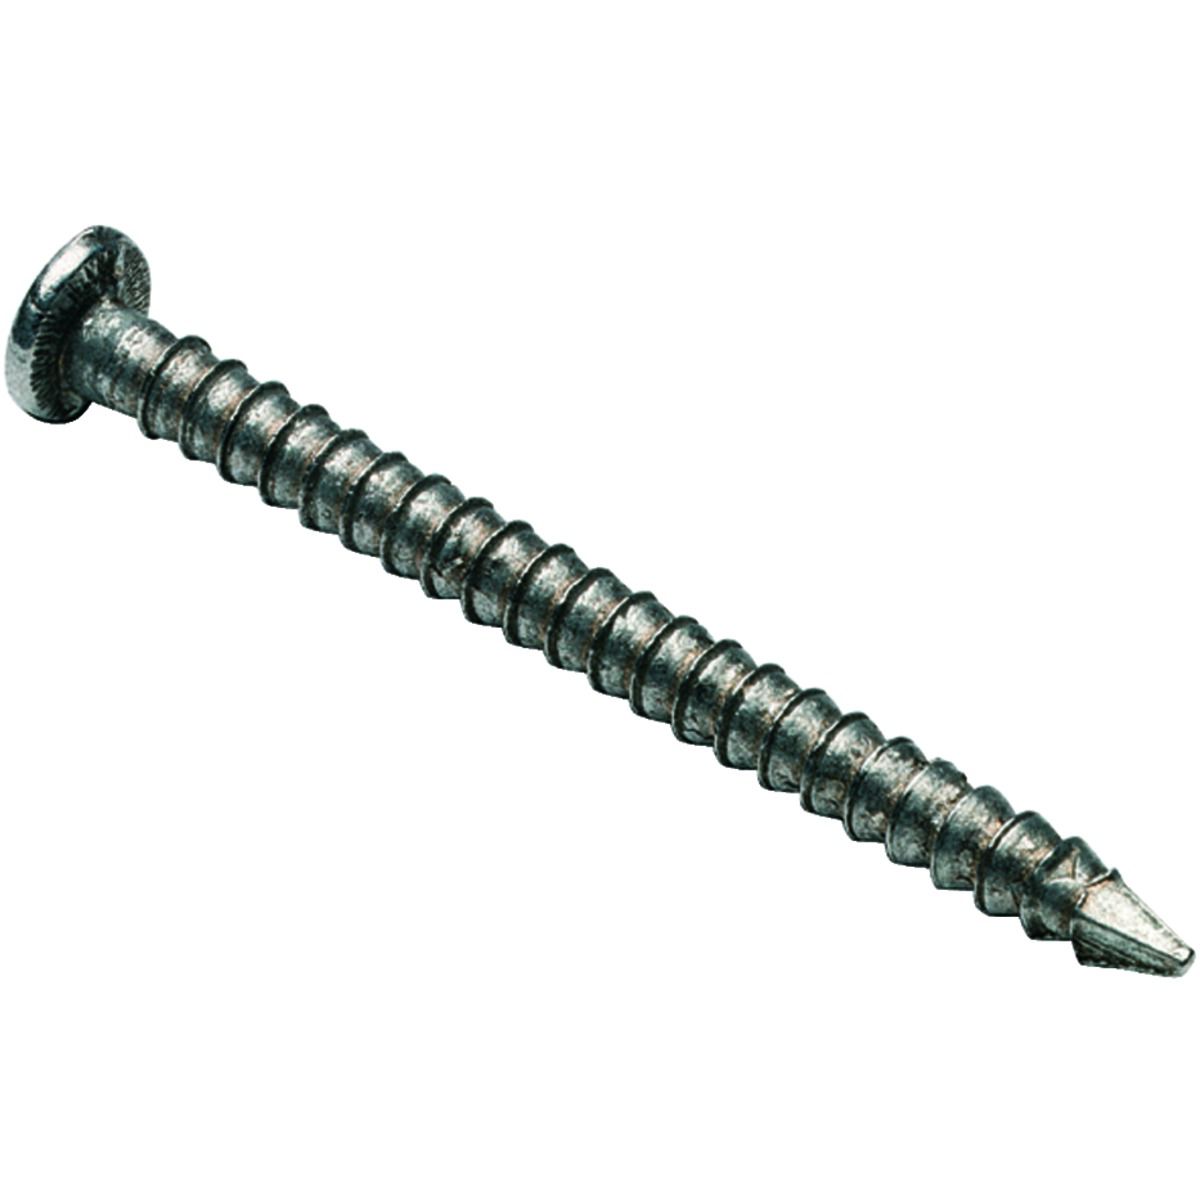 Image of Wickes 75mm Bright Annular Extra Grip Nails - 400g